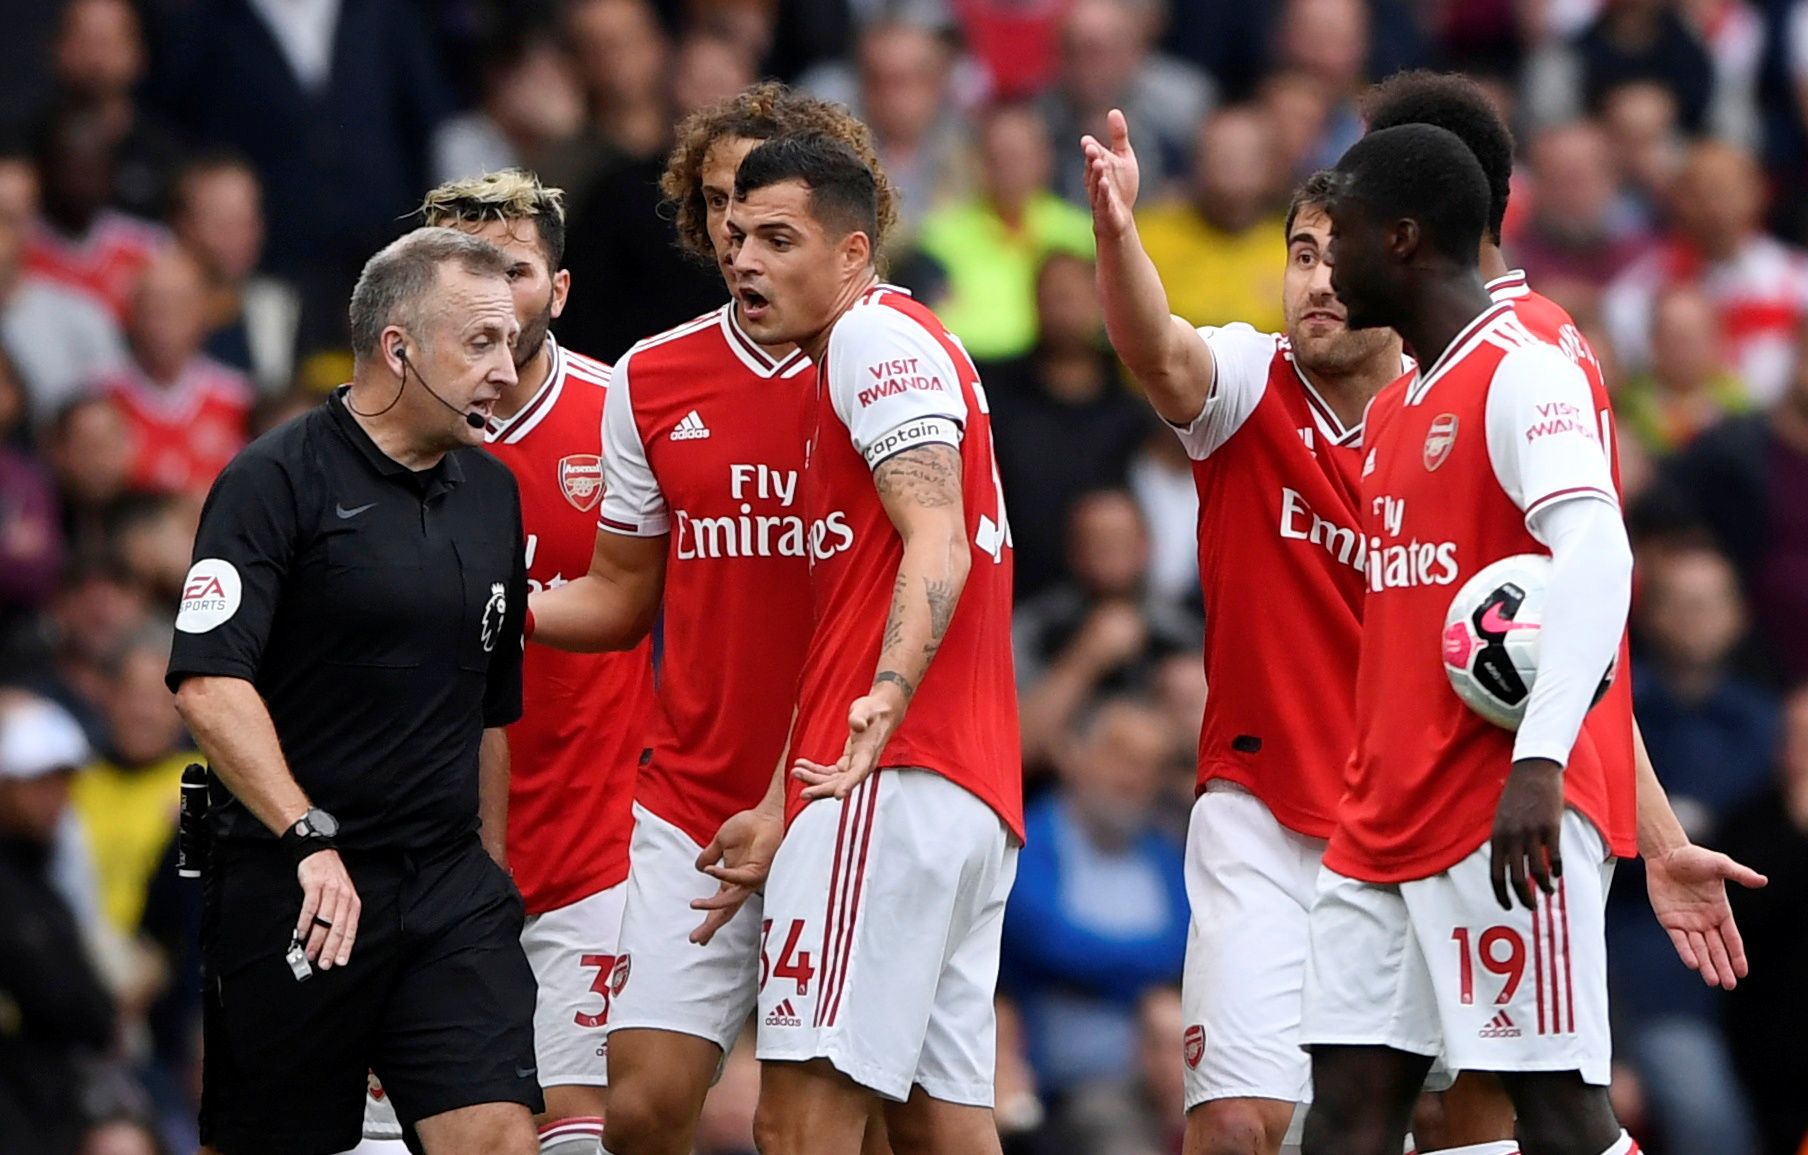 Soccer Football - Premier League - Arsenal v Aston Villa - Emirates Stadium, London, Britain - September 22, 2019  Arsenal's Granit Xhaka remonstrates with referee Jonathon Moss  Action Images via Reuters/Tony O'Brien  EDITORIAL USE ONLY. No use with unauthorized audio, video, data, fixture lists, club/league logos or 